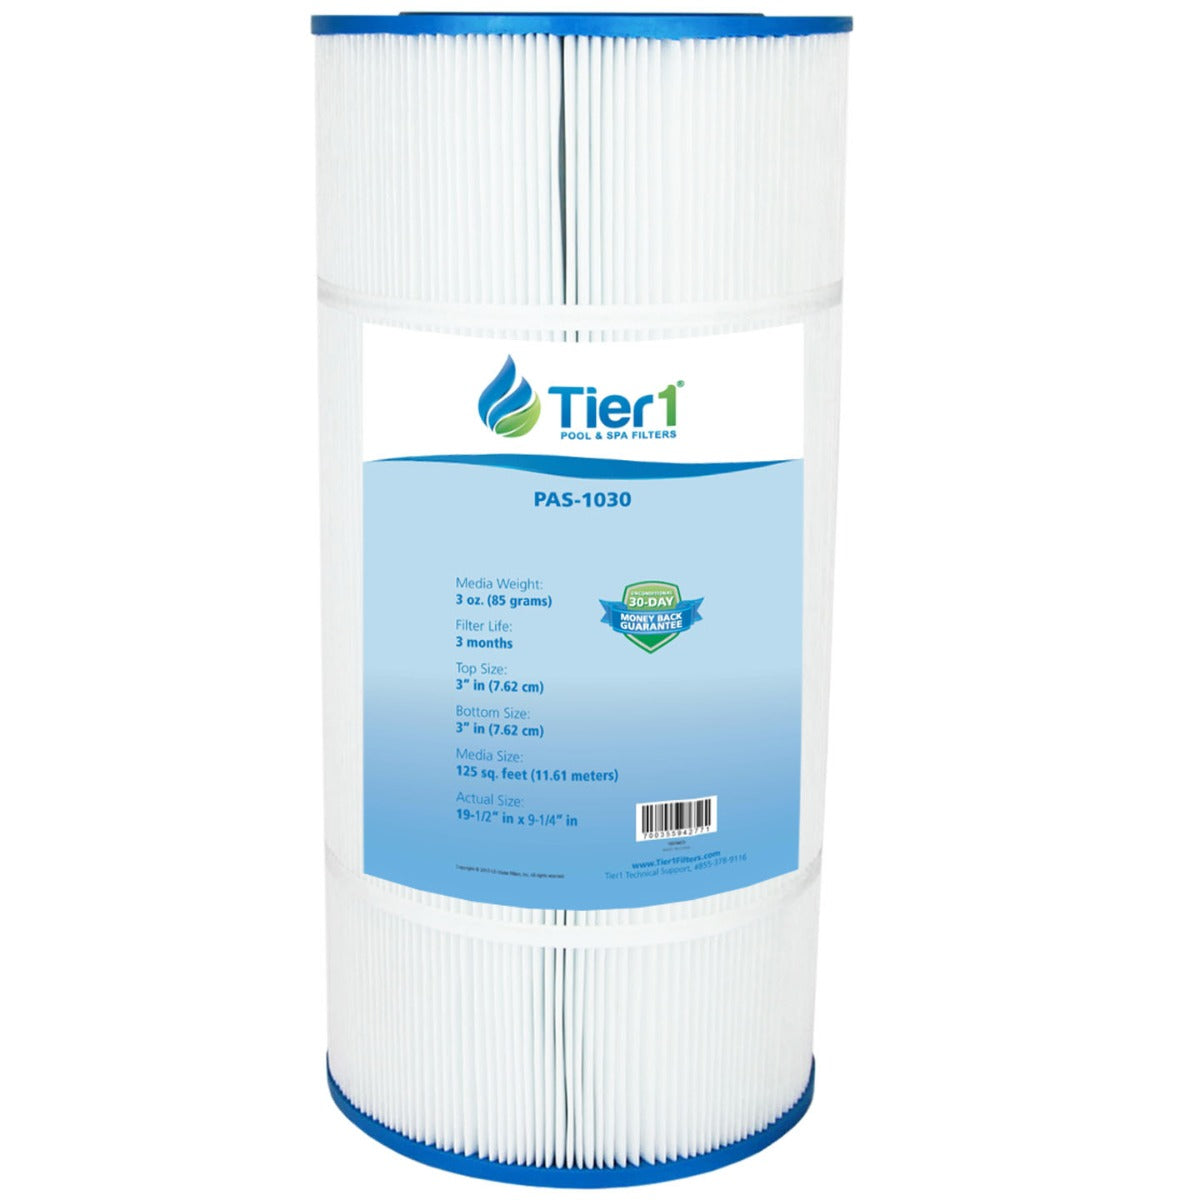 Tier1 Brand Replacement Pool and Spa Filter for CX1250-RE, CX1500-RE